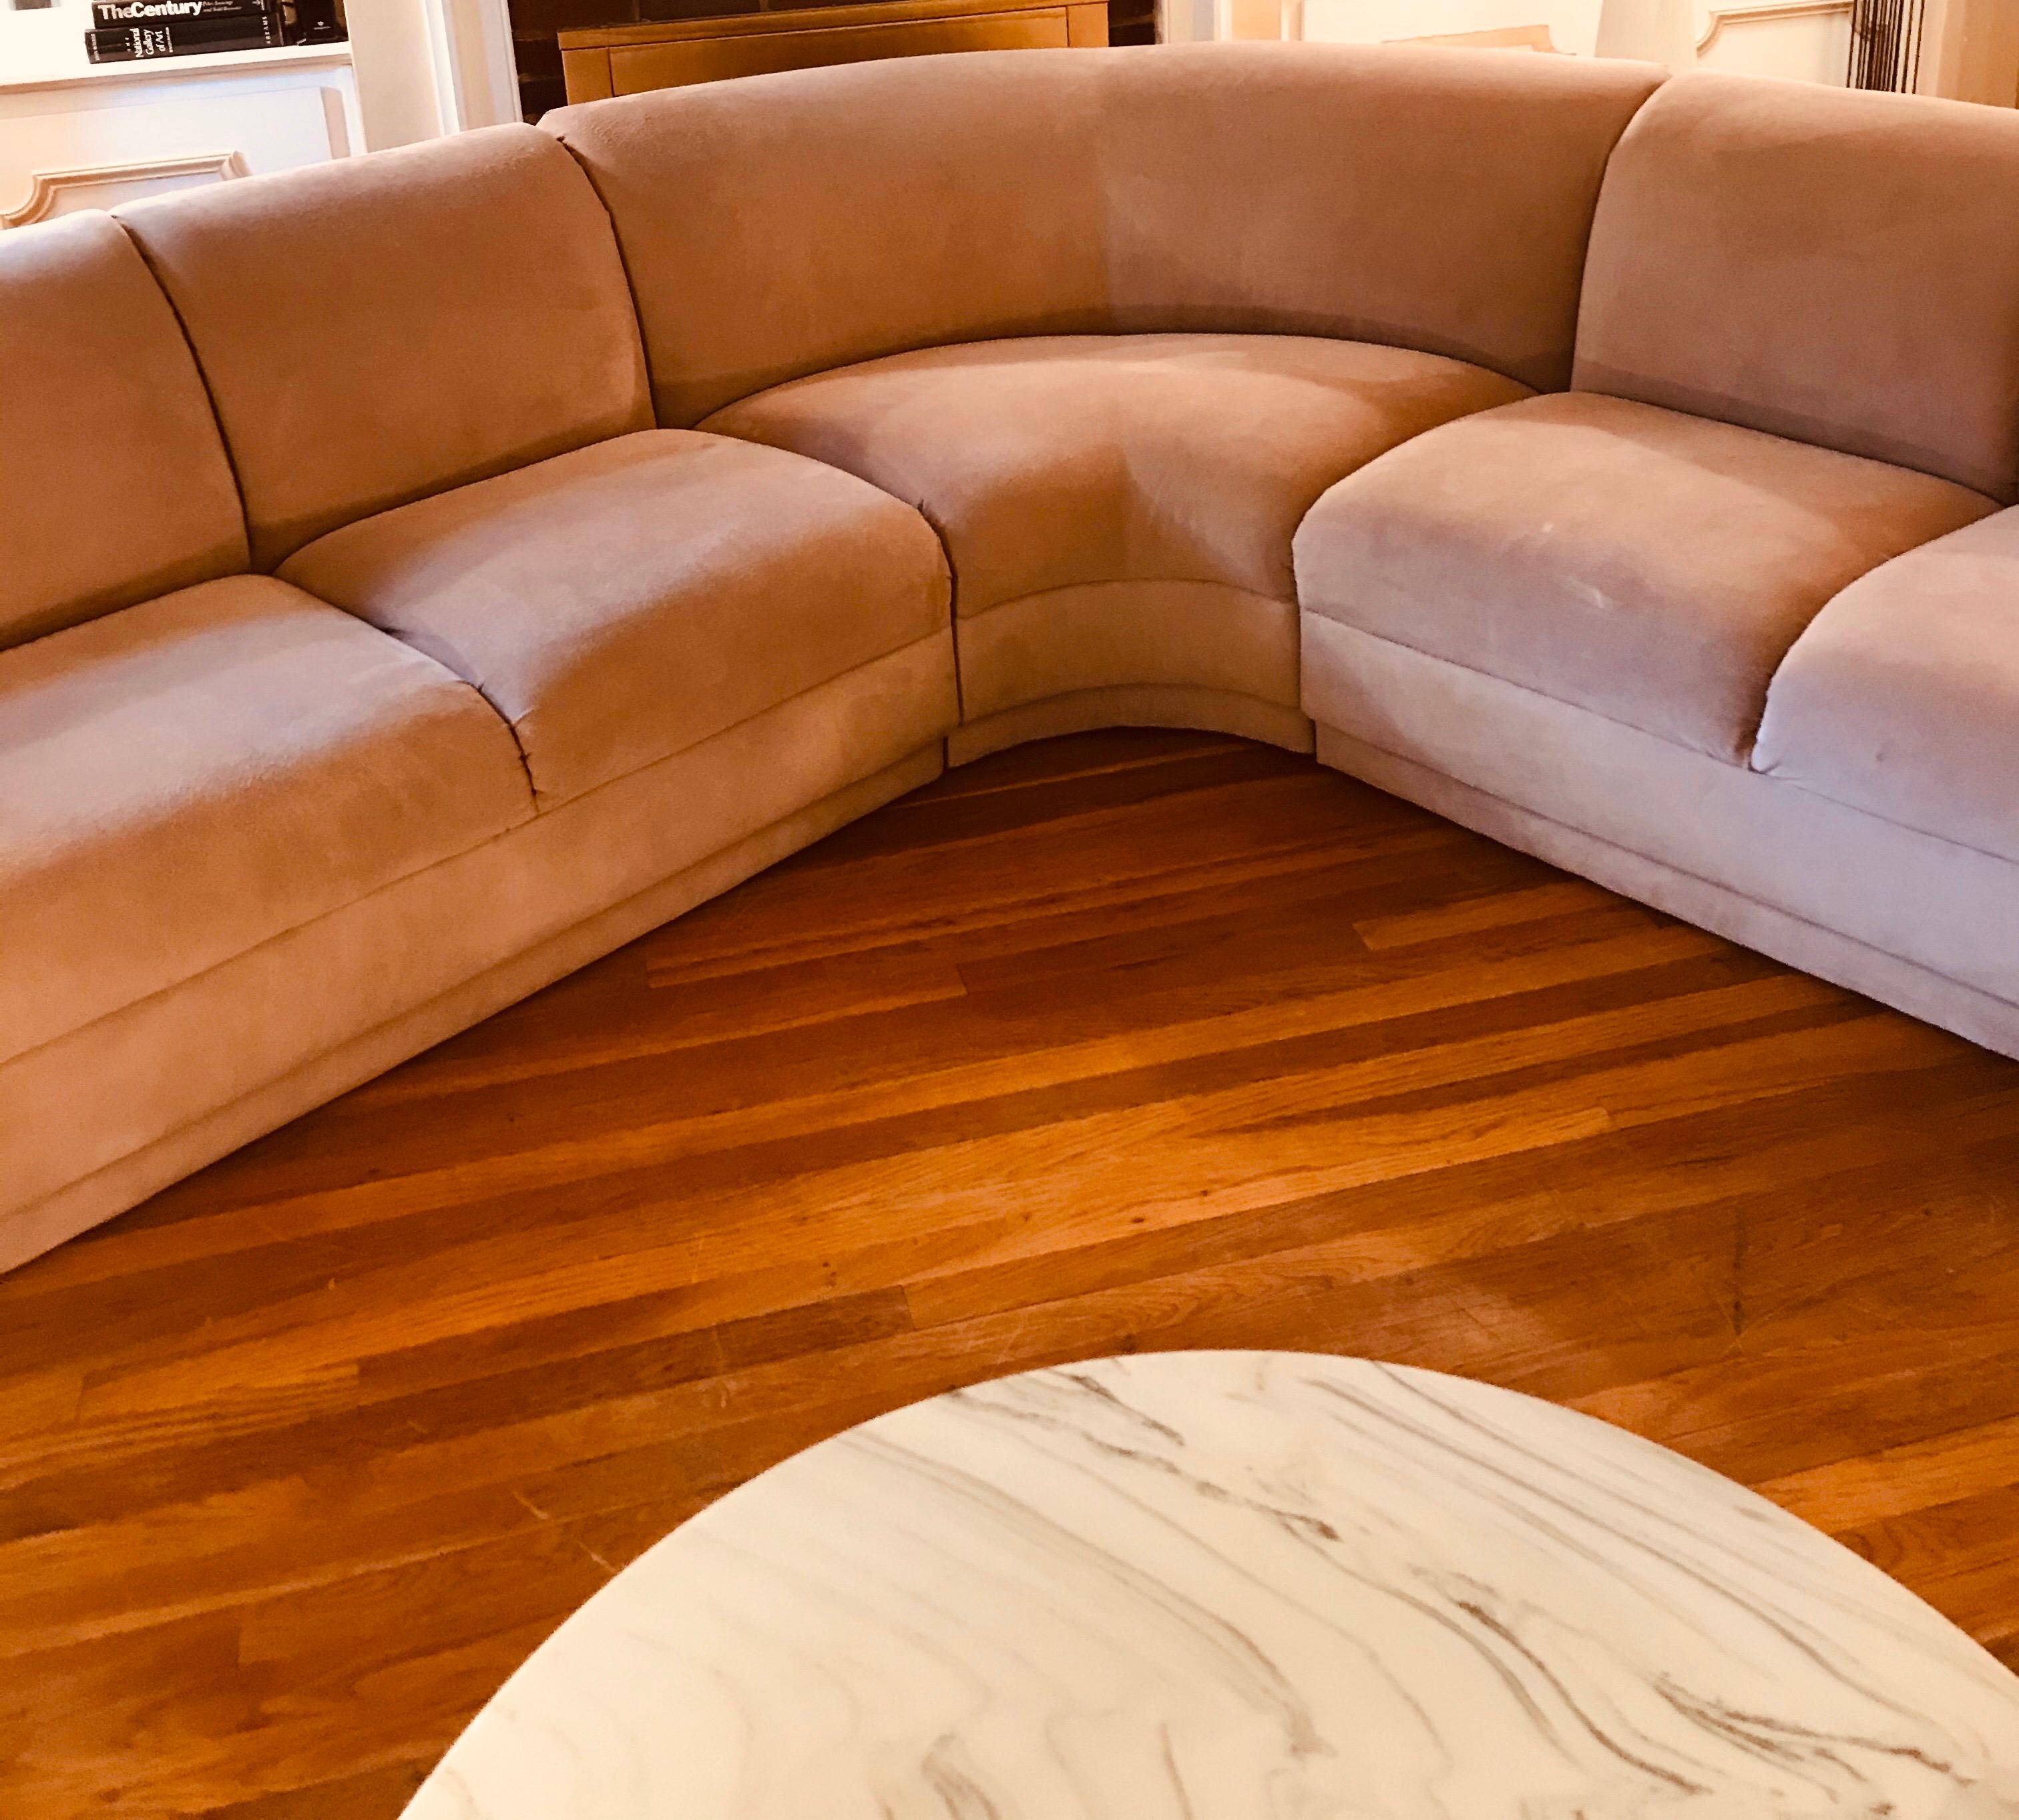 The most lovely sculptural sectional sofa, finished on all sides so that it may float in a room. The upholstery is all original in fantastic shape, the dusty blush hue is breathtaking. This sofa can work in myriad arrangements, if you’ll see